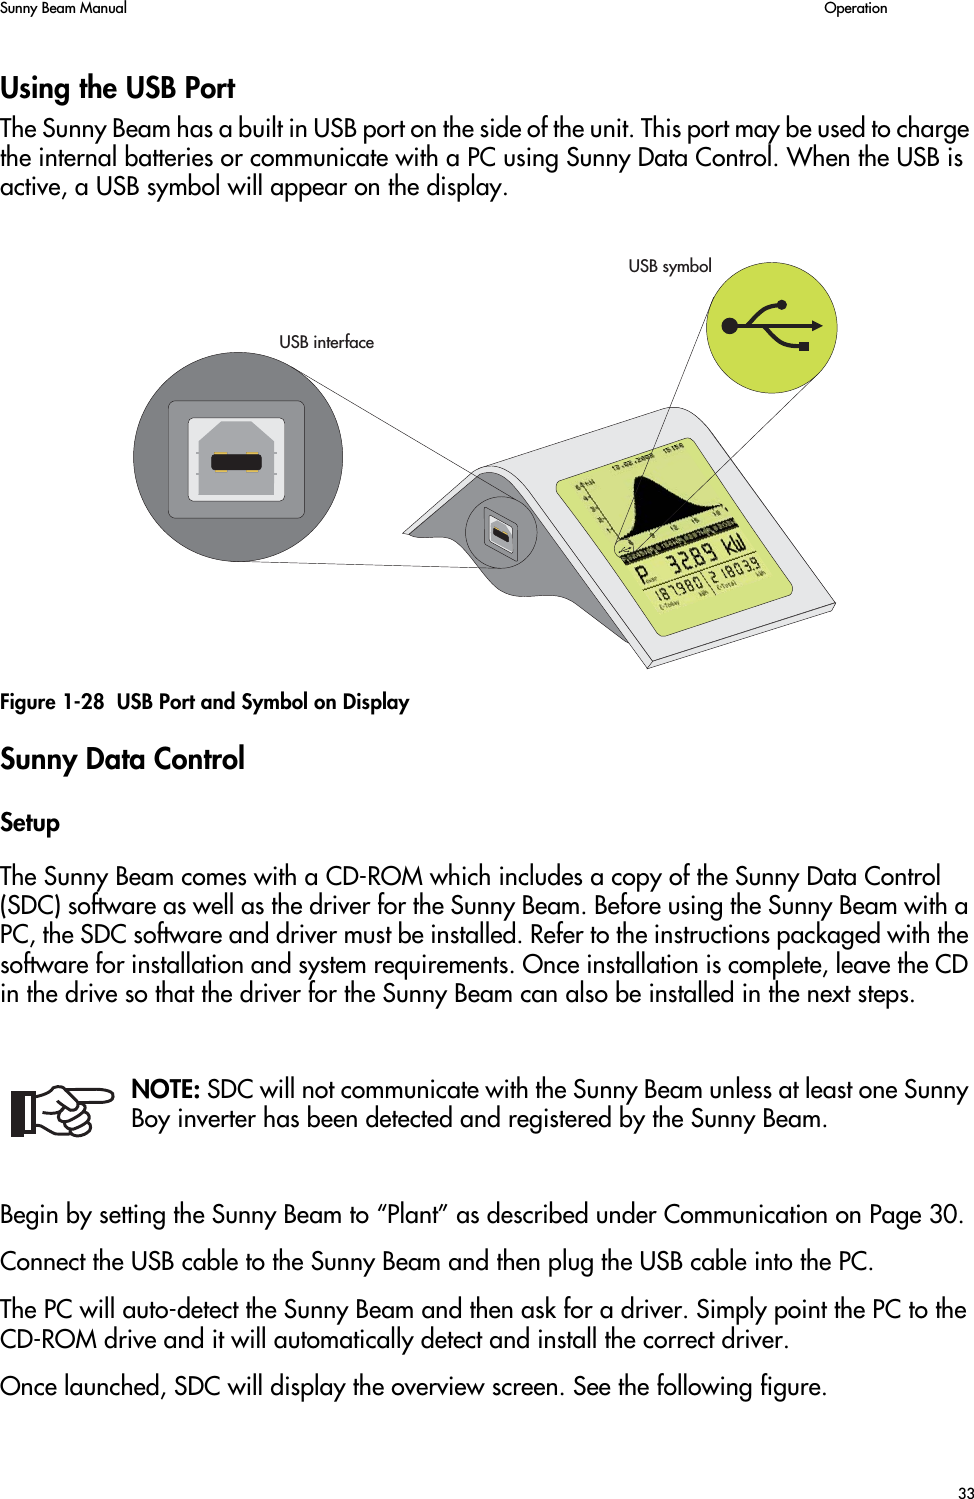 Sunny Beam Manual   Operation33Using the USB PortThe Sunny Beam has a built in USB port on the side of the unit. This port may be used to charge the internal batteries or communicate with a PC using Sunny Data Control. When the USB is active, a USB symbol will appear on the display.Figure 1-28  USB Port and Symbol on DisplaySunny Data ControlSetupThe Sunny Beam comes with a CD-ROM which includes a copy of the Sunny Data Control (SDC) software as well as the driver for the Sunny Beam. Before using the Sunny Beam with a PC, the SDC software and driver must be installed. Refer to the instructions packaged with the software for installation and system requirements. Once installation is complete, leave the CD in the drive so that the driver for the Sunny Beam can also be installed in the next steps.NOTE: SDC will not communicate with the Sunny Beam unless at least one Sunny Boy inverter has been detected and registered by the Sunny Beam.Begin by setting the Sunny Beam to “Plant” as described under Communication on Page 30.Connect the USB cable to the Sunny Beam and then plug the USB cable into the PC.The PC will auto-detect the Sunny Beam and then ask for a driver. Simply point the PC to the CD-ROM drive and it will automatically detect and install the correct driver.Once launched, SDC will display the overview screen. See the following figure.53&quot;INTERFACE53&quot;SYMBOL